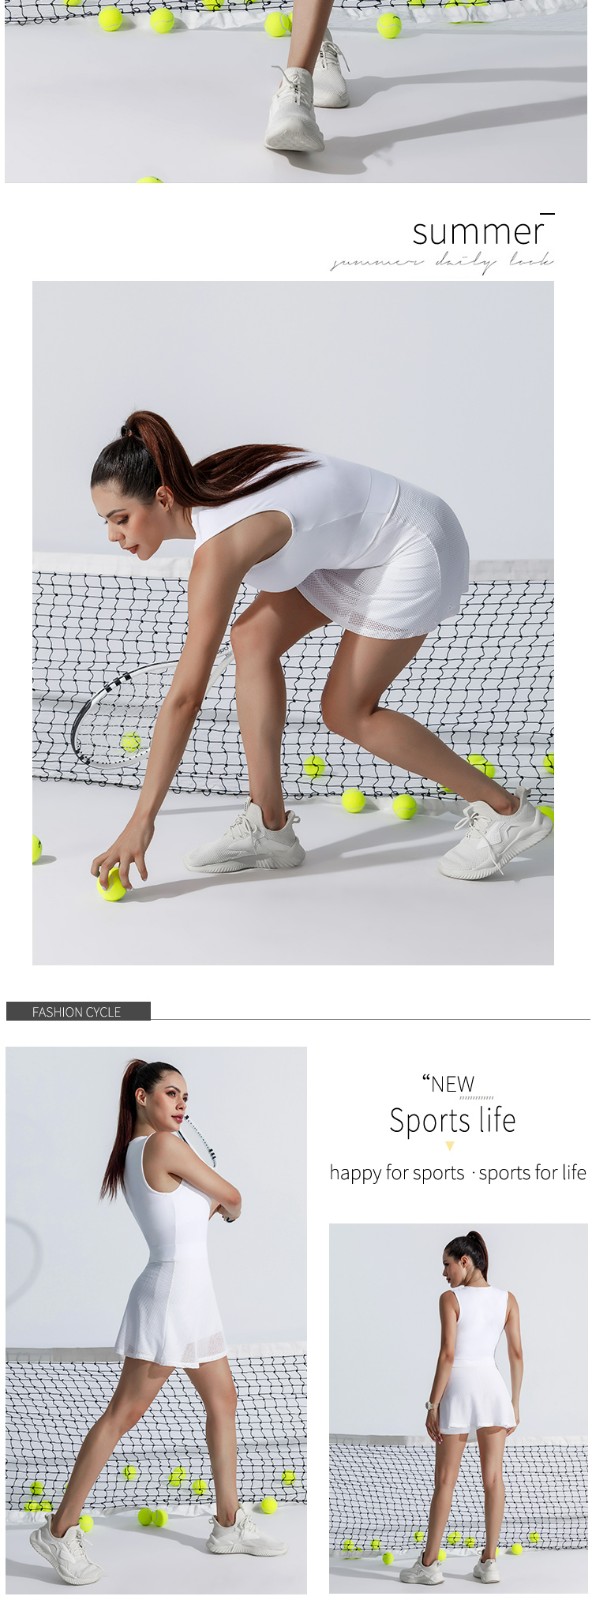 INGOR custom women's tennis outfits at the gym-5